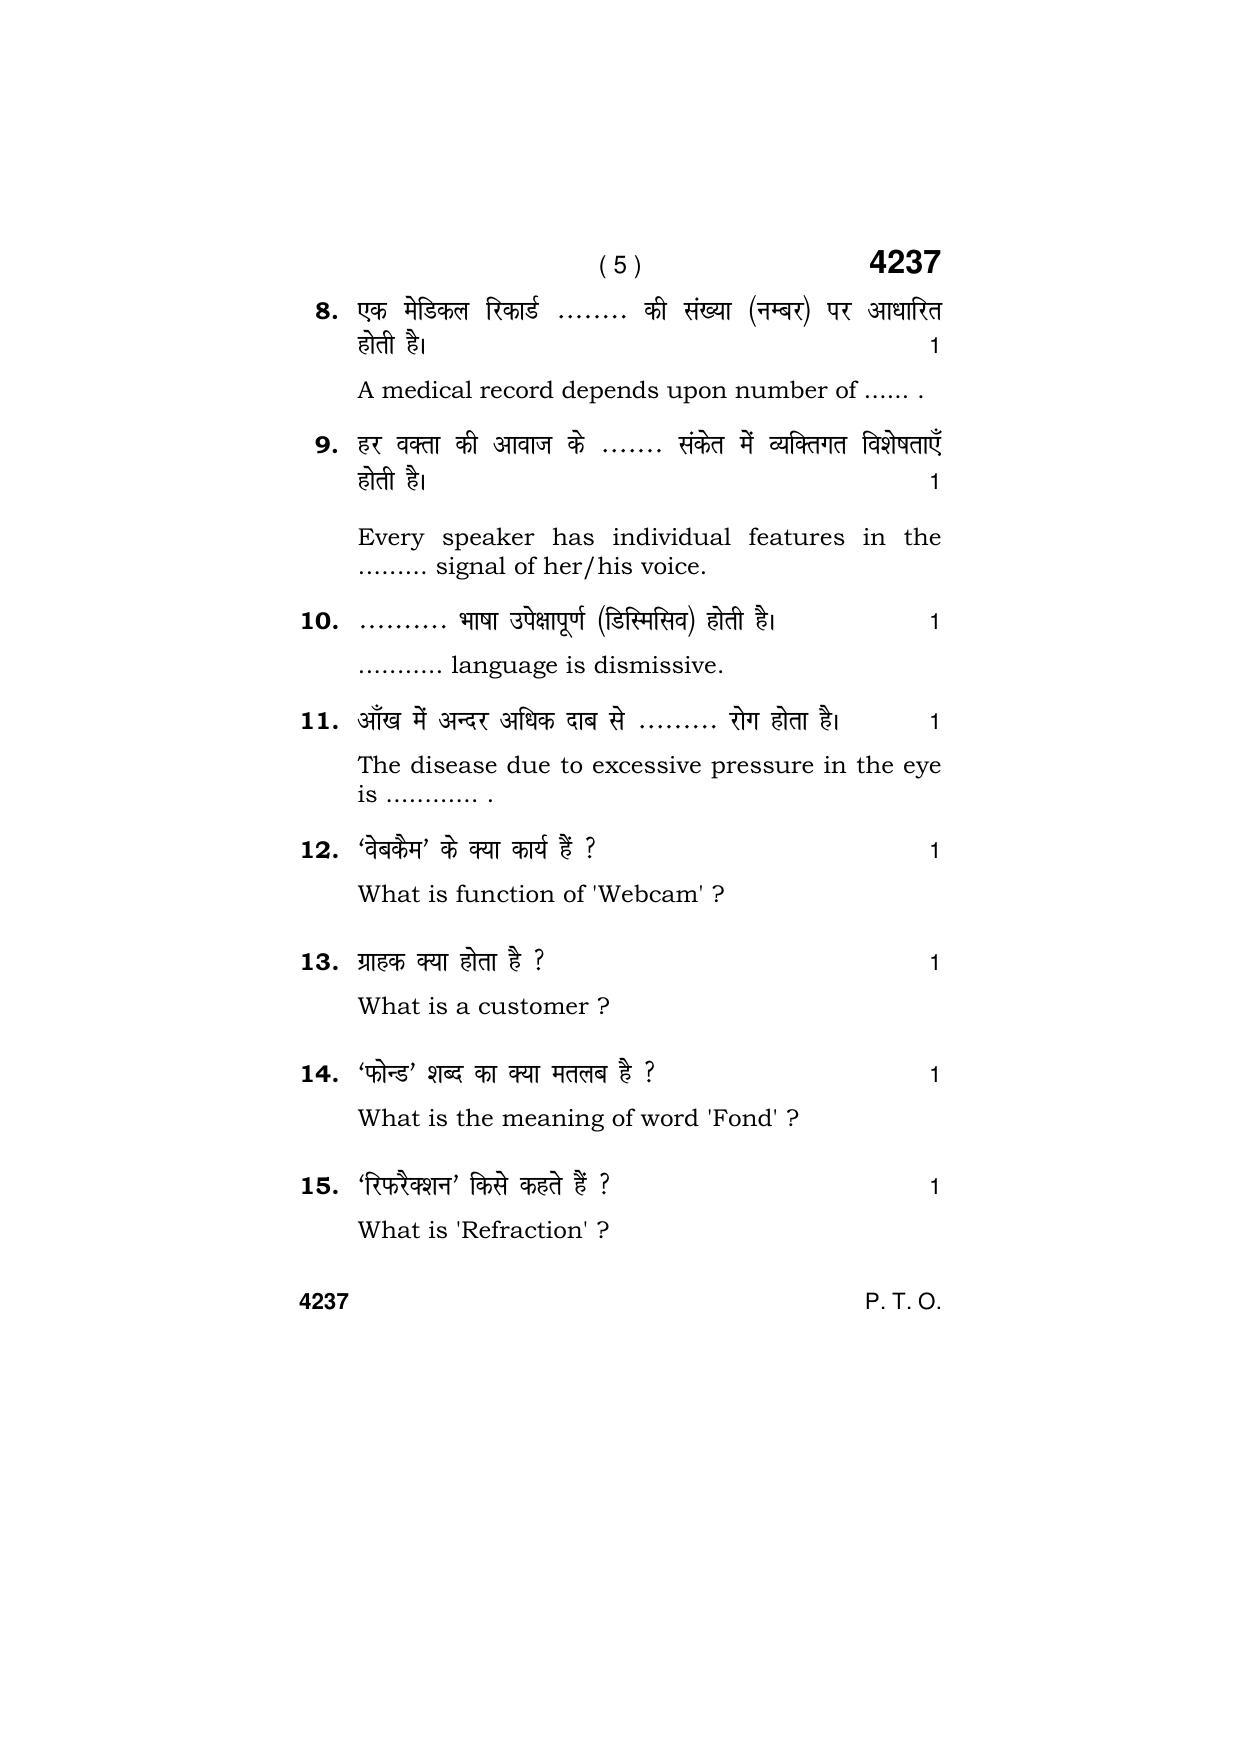 Haryana Board HBSE Class 10 Vision Technician 2019 Question Paper - Page 5